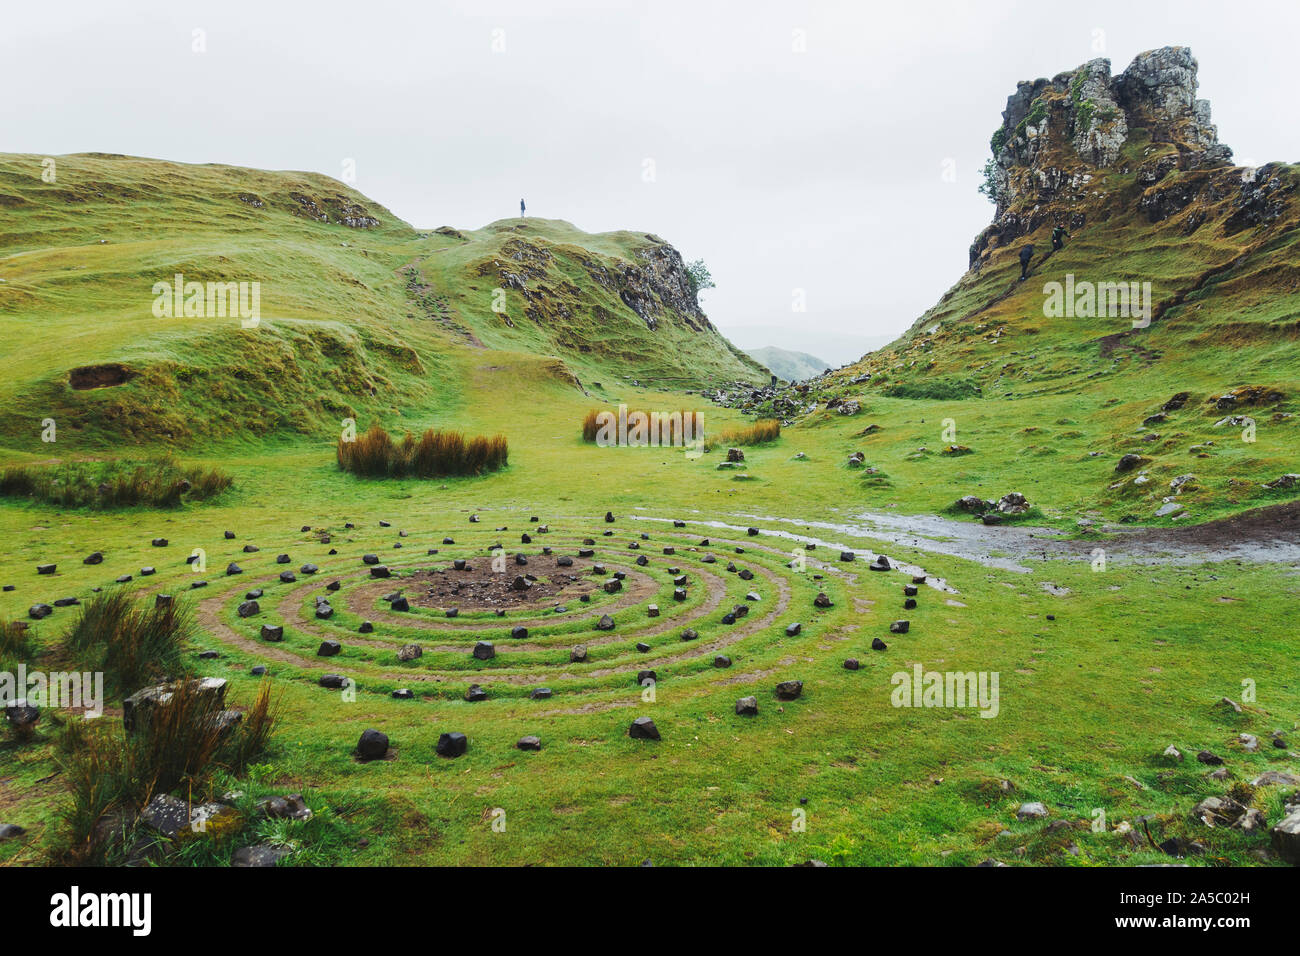 The concentric circles of stones in the enchanting grass-covered hills of The Fairy Glen, Isle of Skye, Scotland Stock Photo